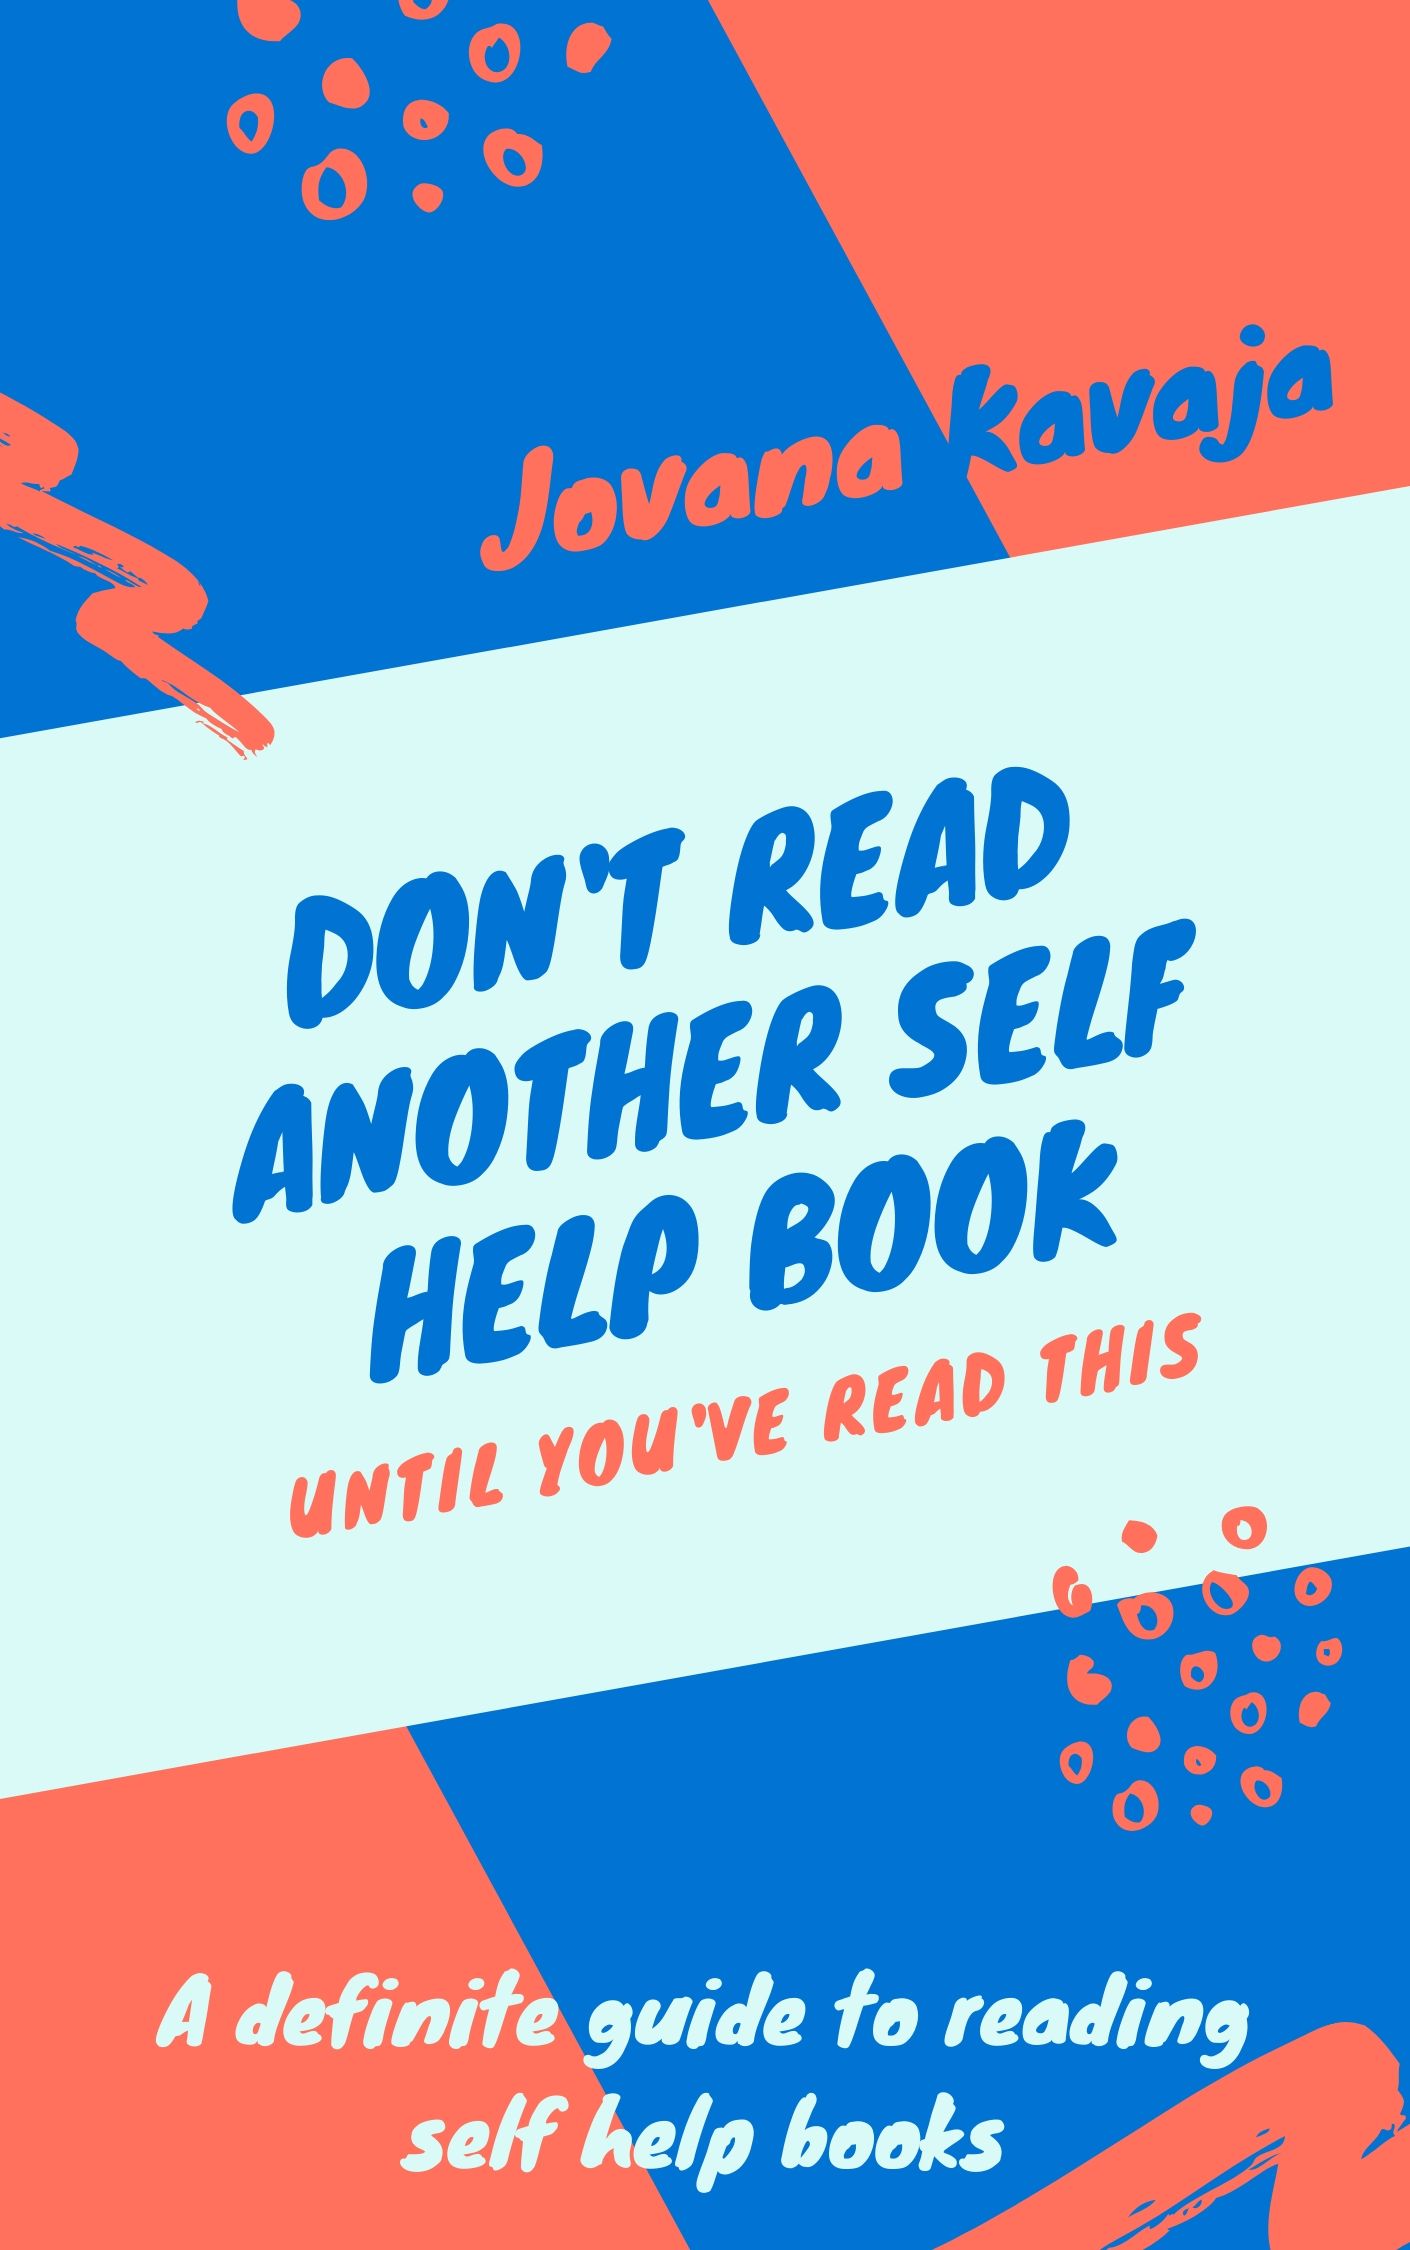 FREE: DON’T READ ANOTHER SELF-HELP BOOK: Until you’ve read this prequel by Jovana Kavaja